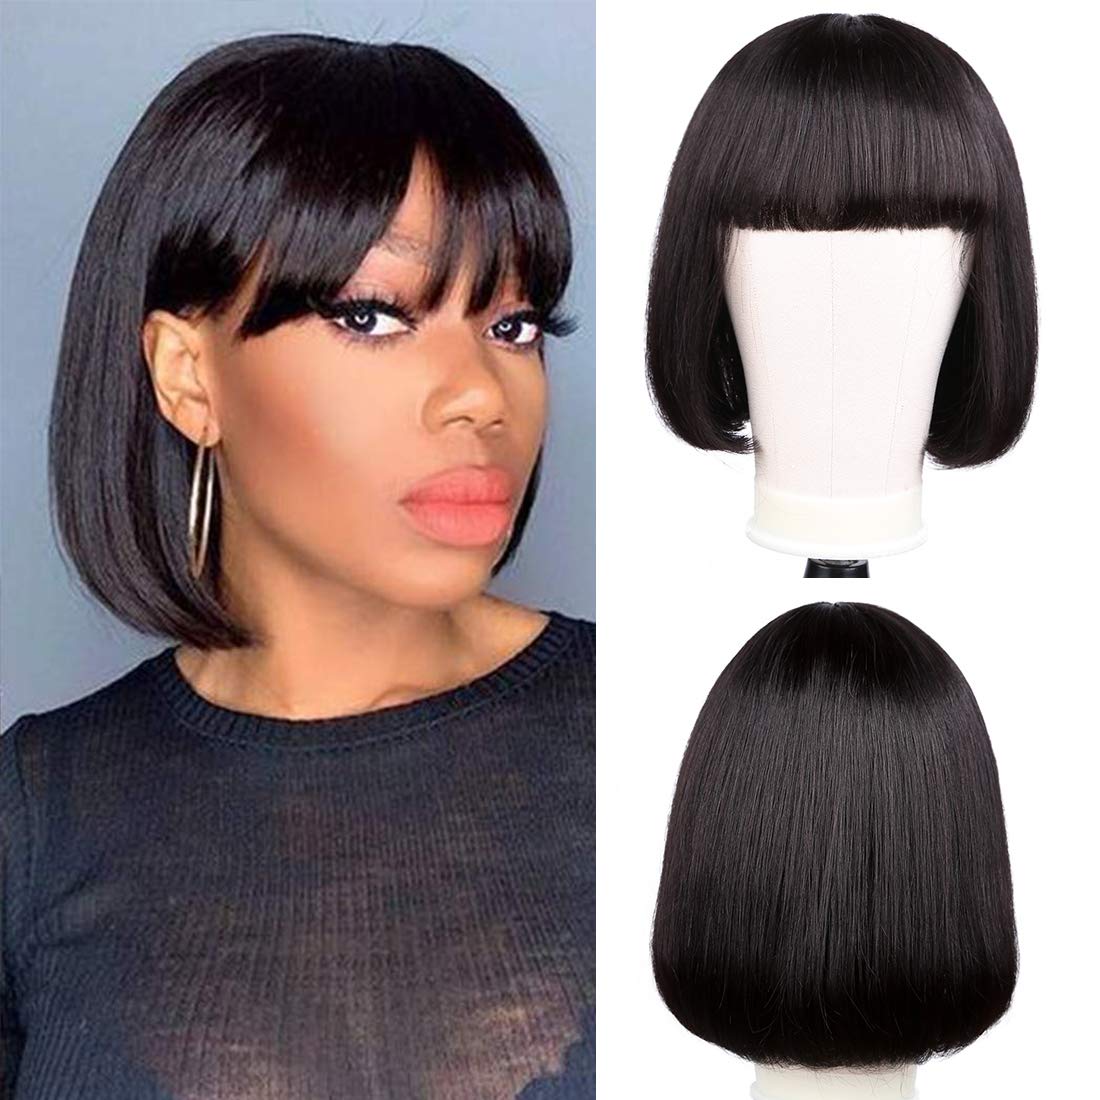 Price:$28.17     Human Hair Wigs With Bangs Short Bob Wig 8 Inch Straight Hair Brazilian Hair Wigs Natural Color No Lace Human Hair Wigs For Black Women Machine Made Wigs With Bangs   Beauty